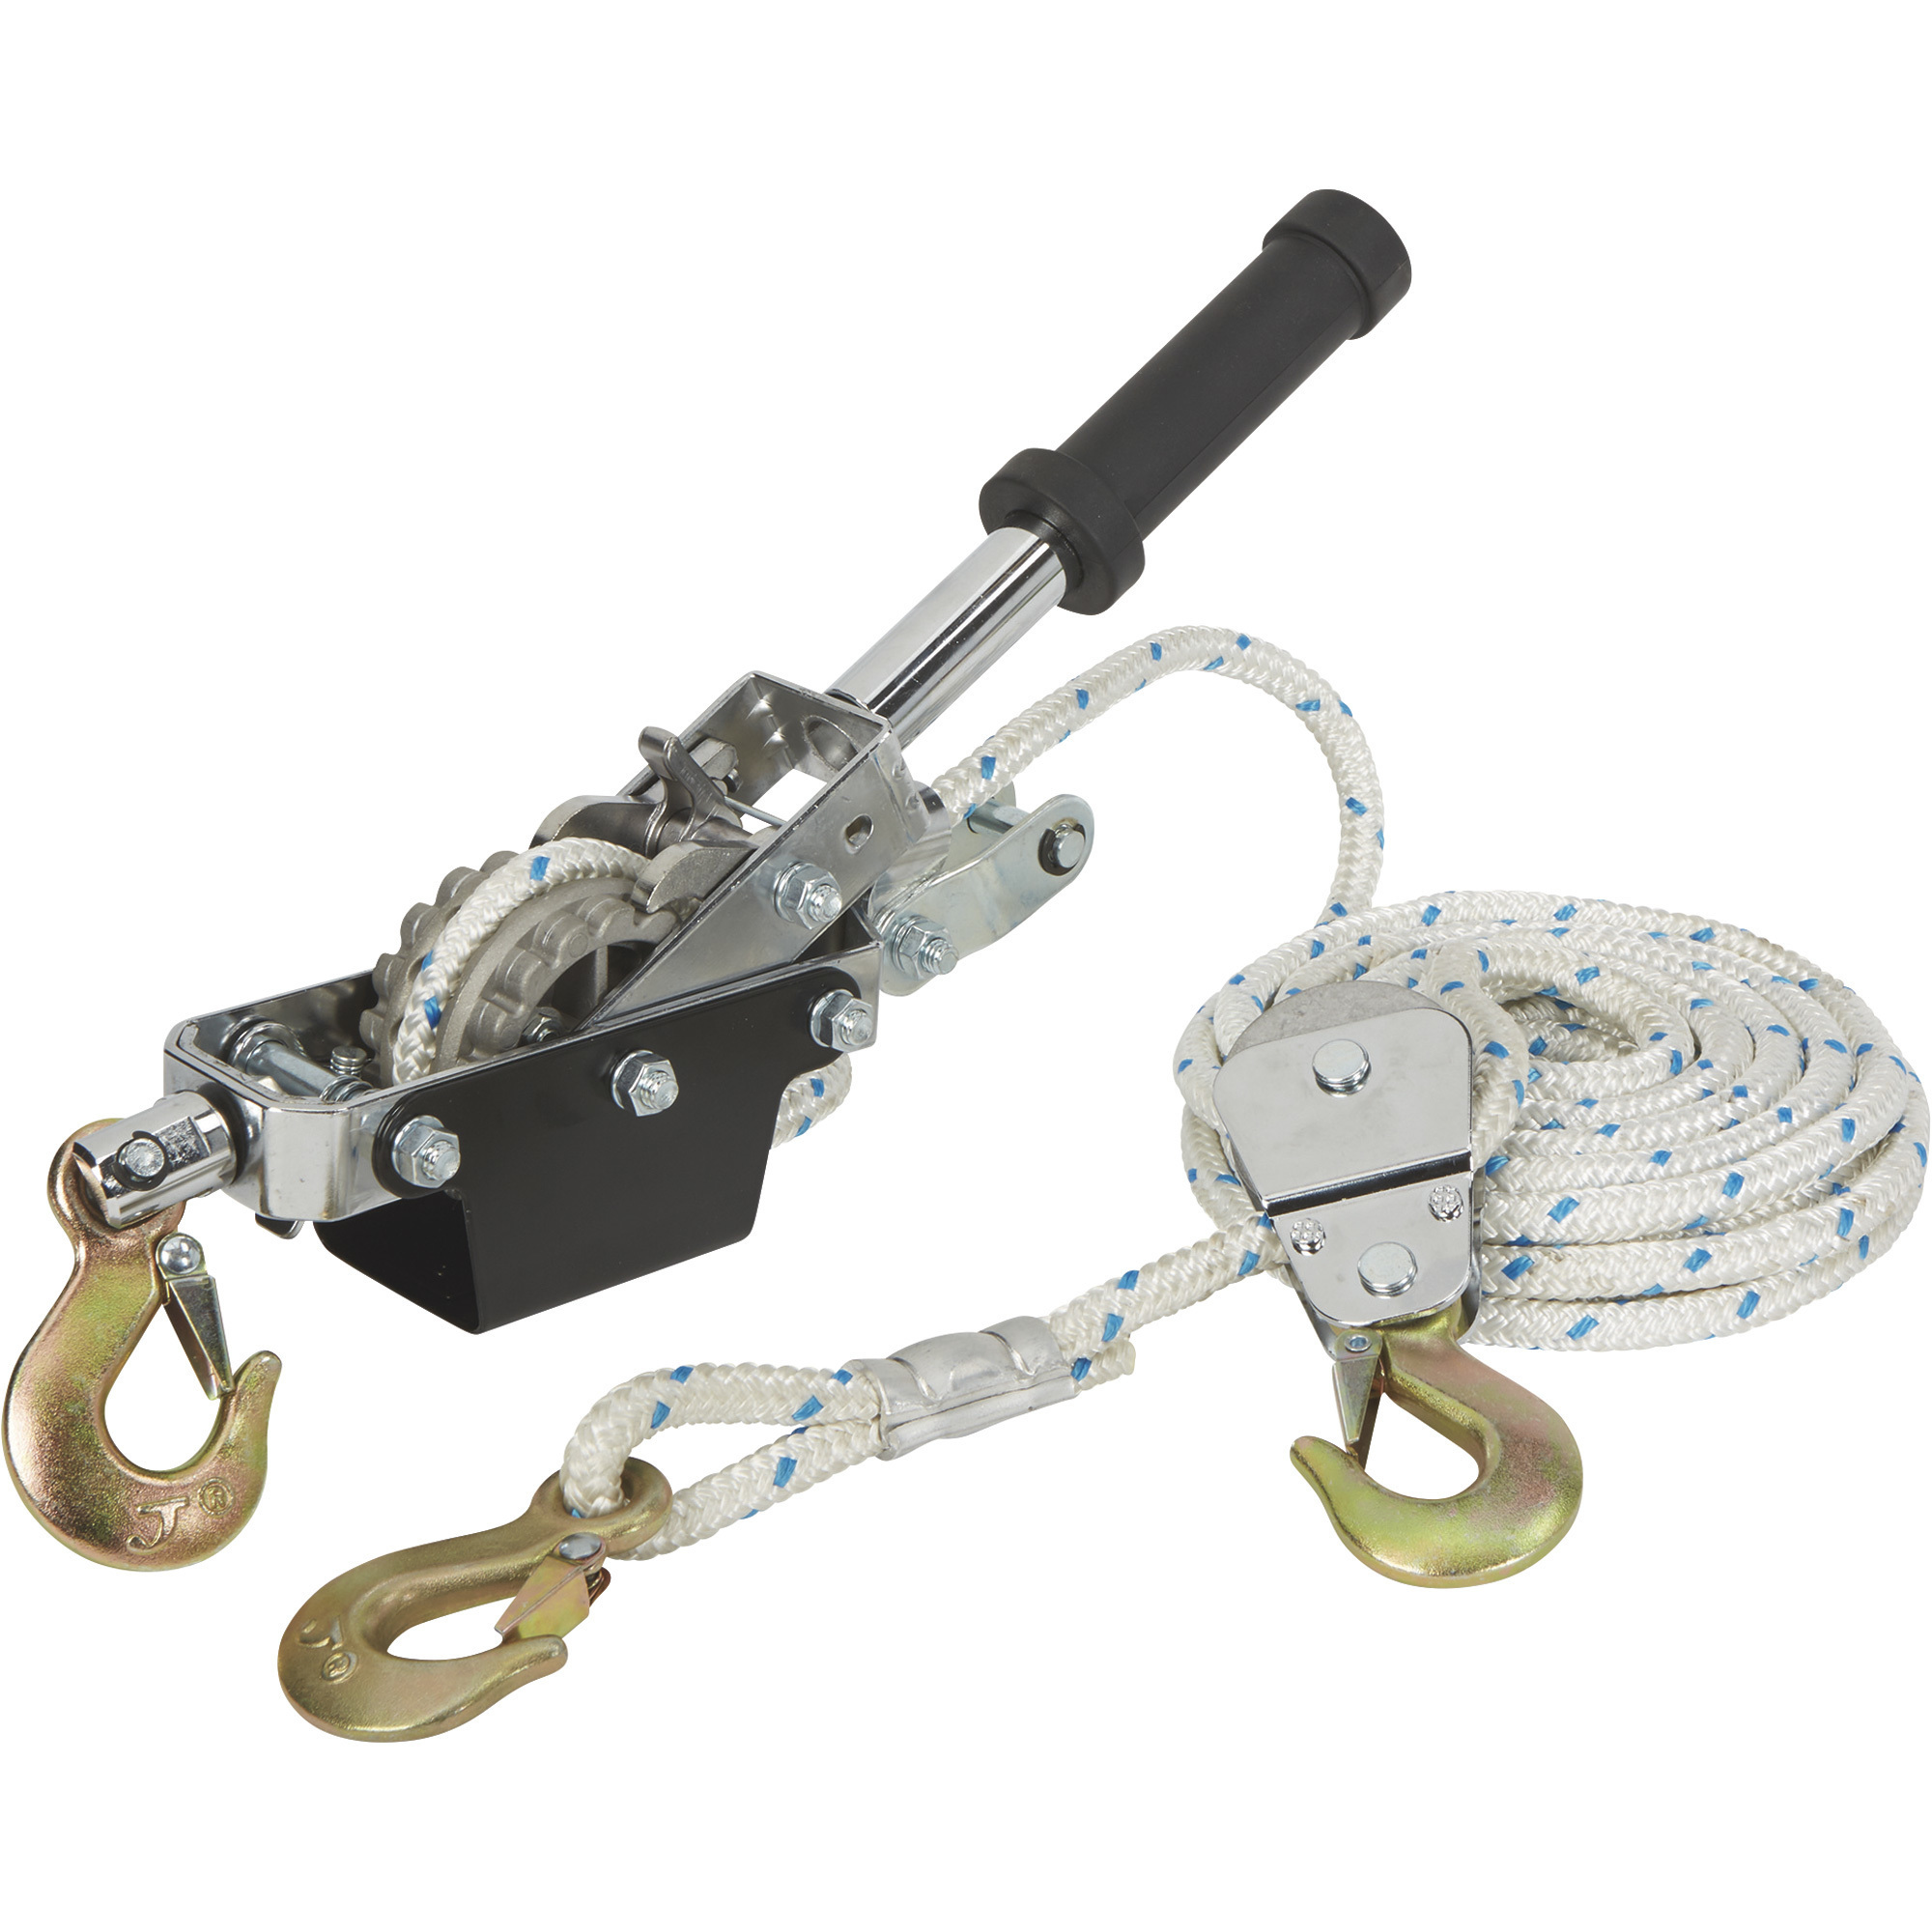 Ironton 1-Ton Rope Puller with 3 Hooks,19.7ft.L